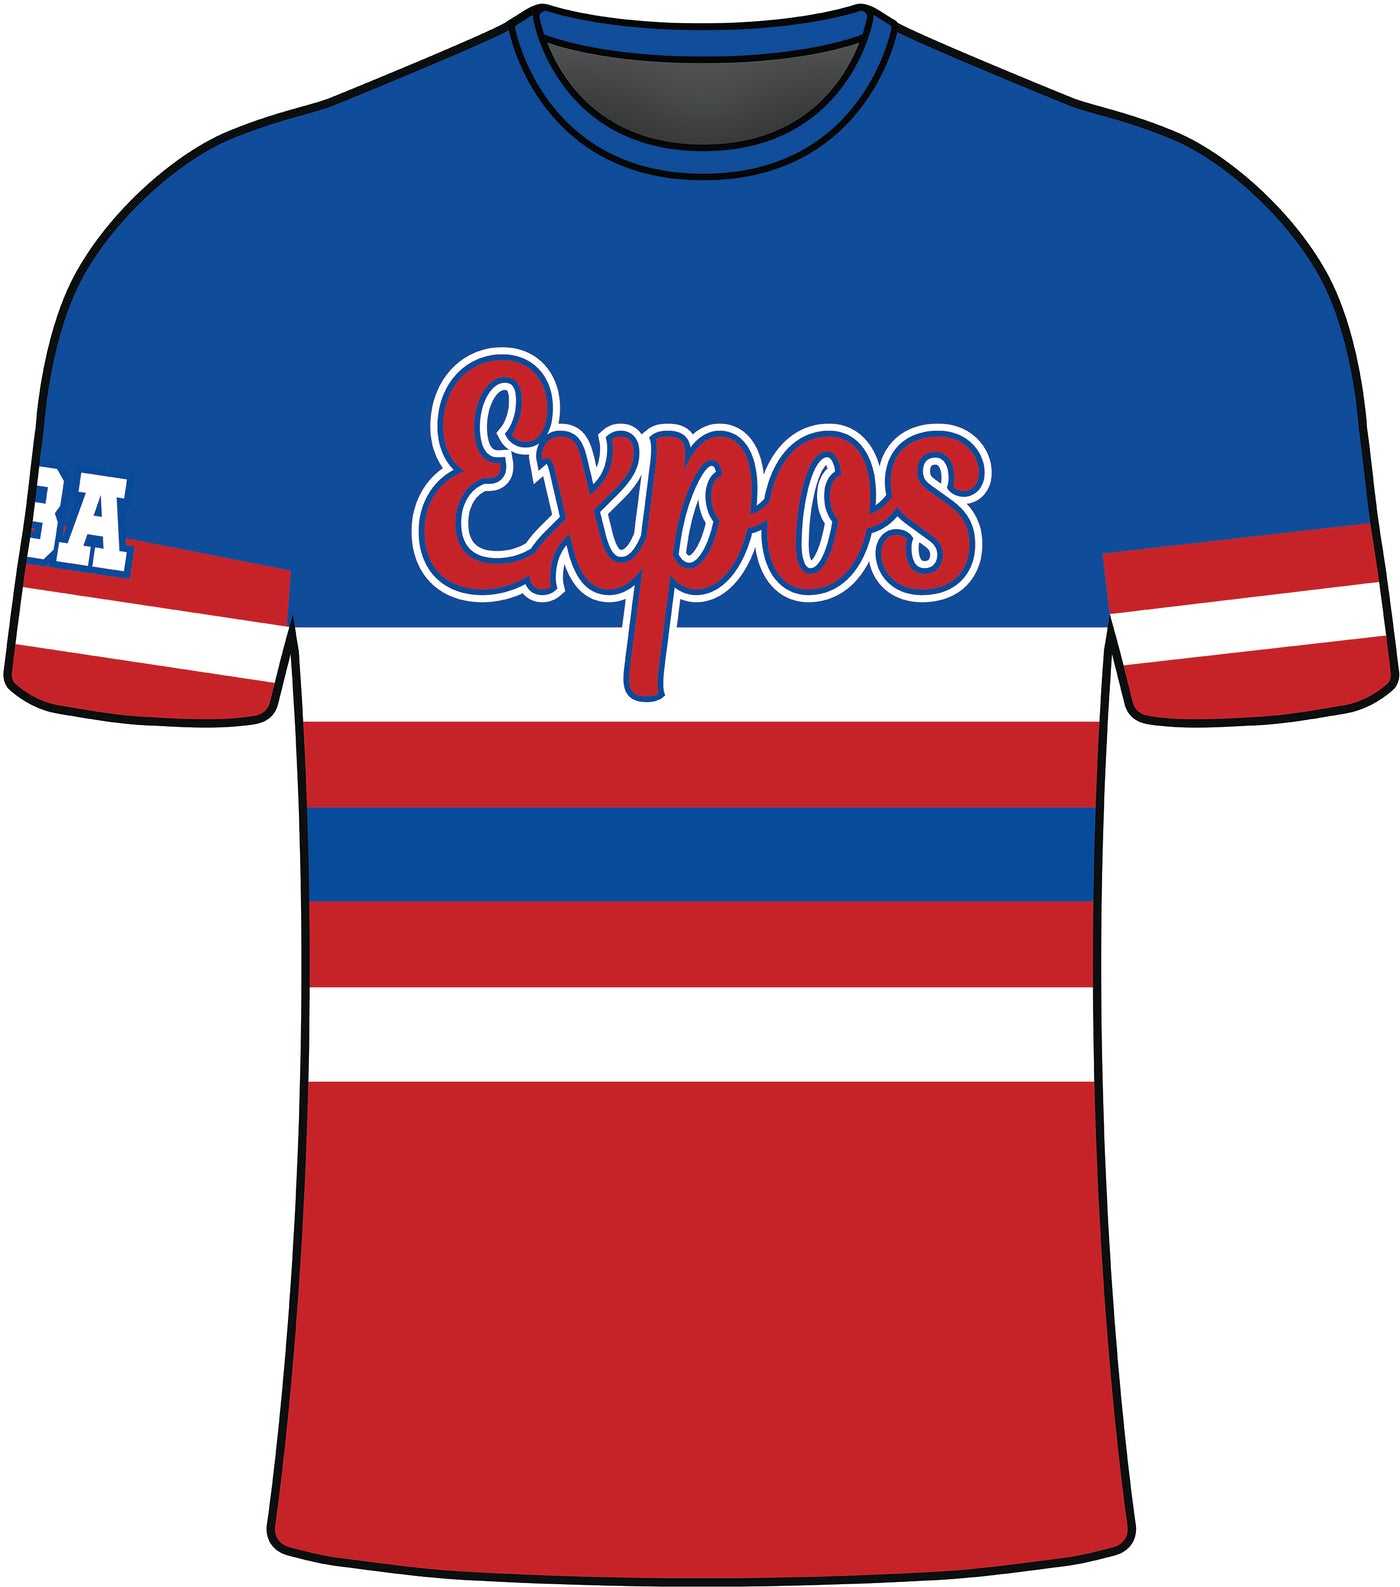 Full Dye Sublimated Short Sleeve Jersey Red Stripe Expos 3X-Large